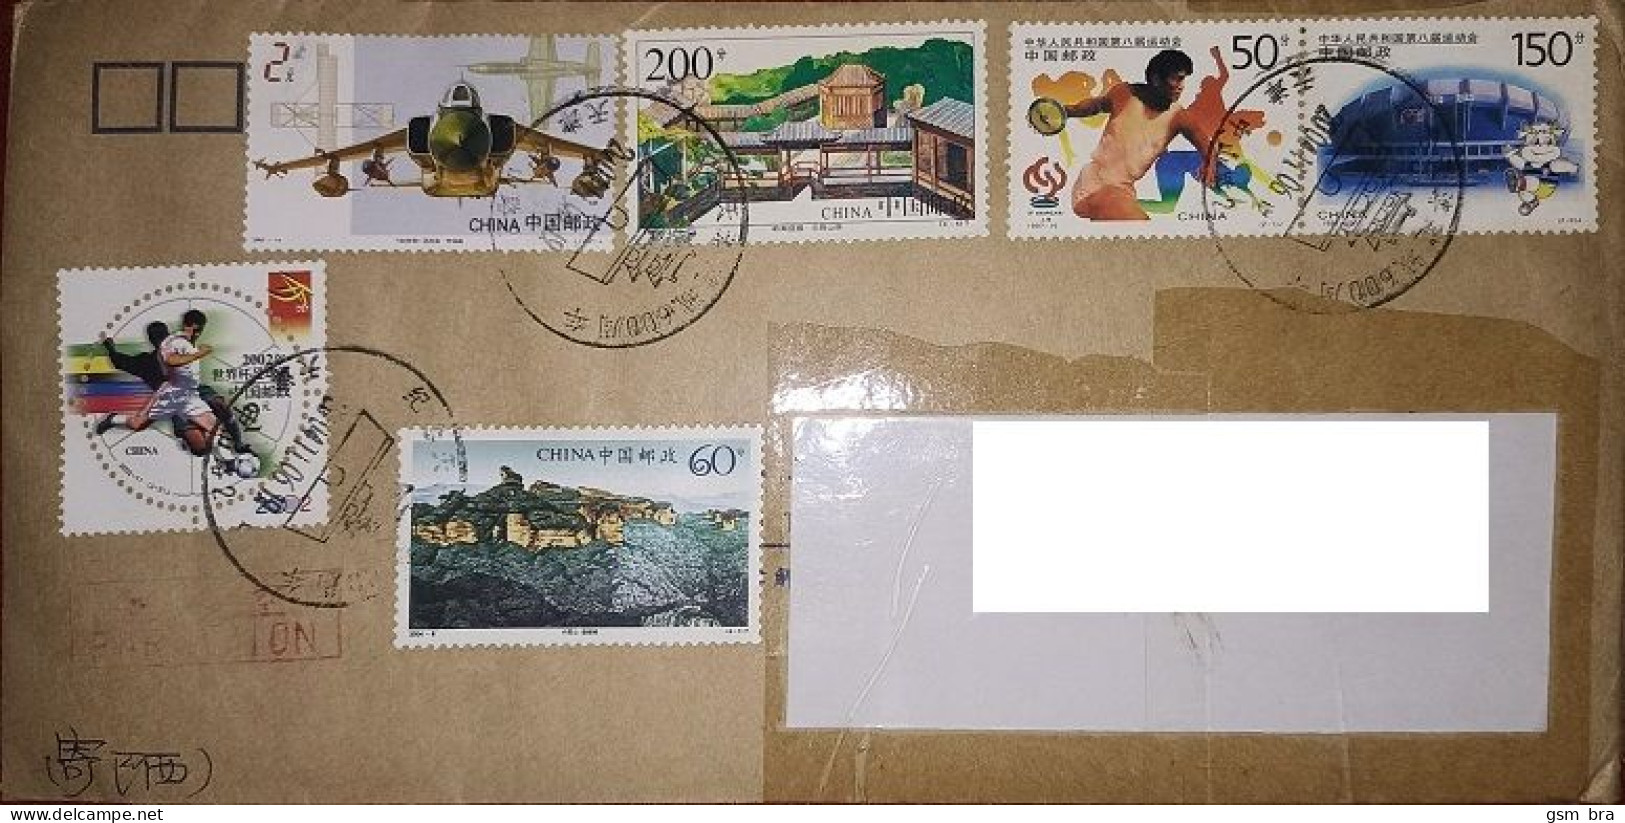 China (PR) 2004: Letter To Brazil - Chinese Architecture, Sports, Soccer, Aviation, Plane. - Covers & Documents